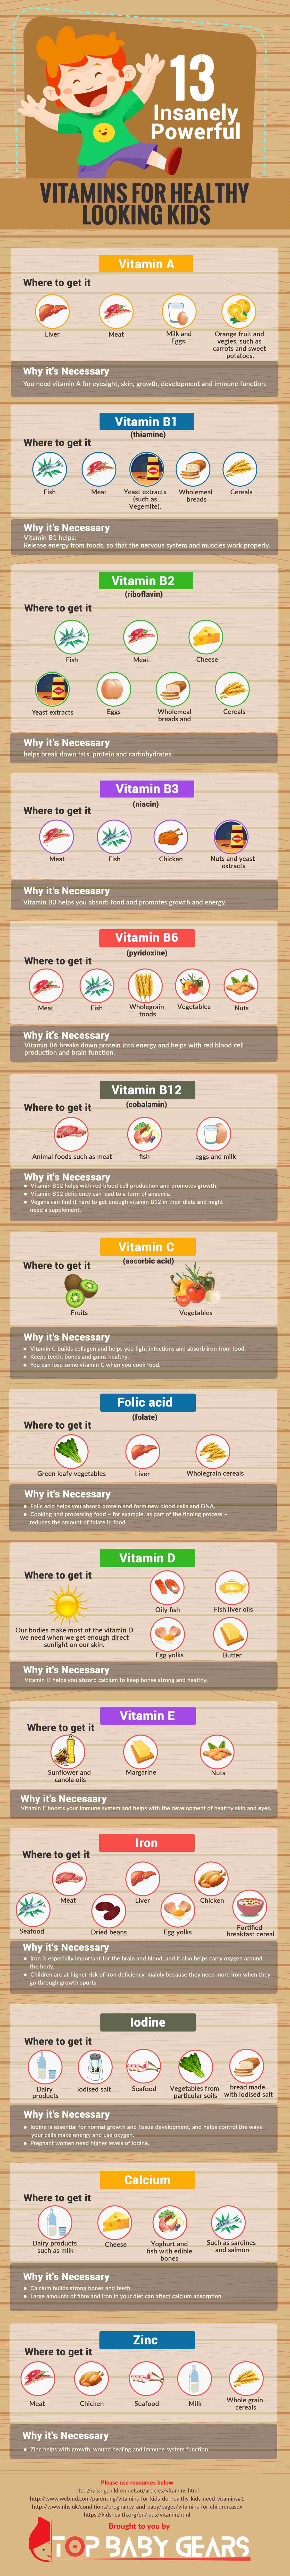 13 Insanely Powerful Vitamins for Healthy Looking Kids